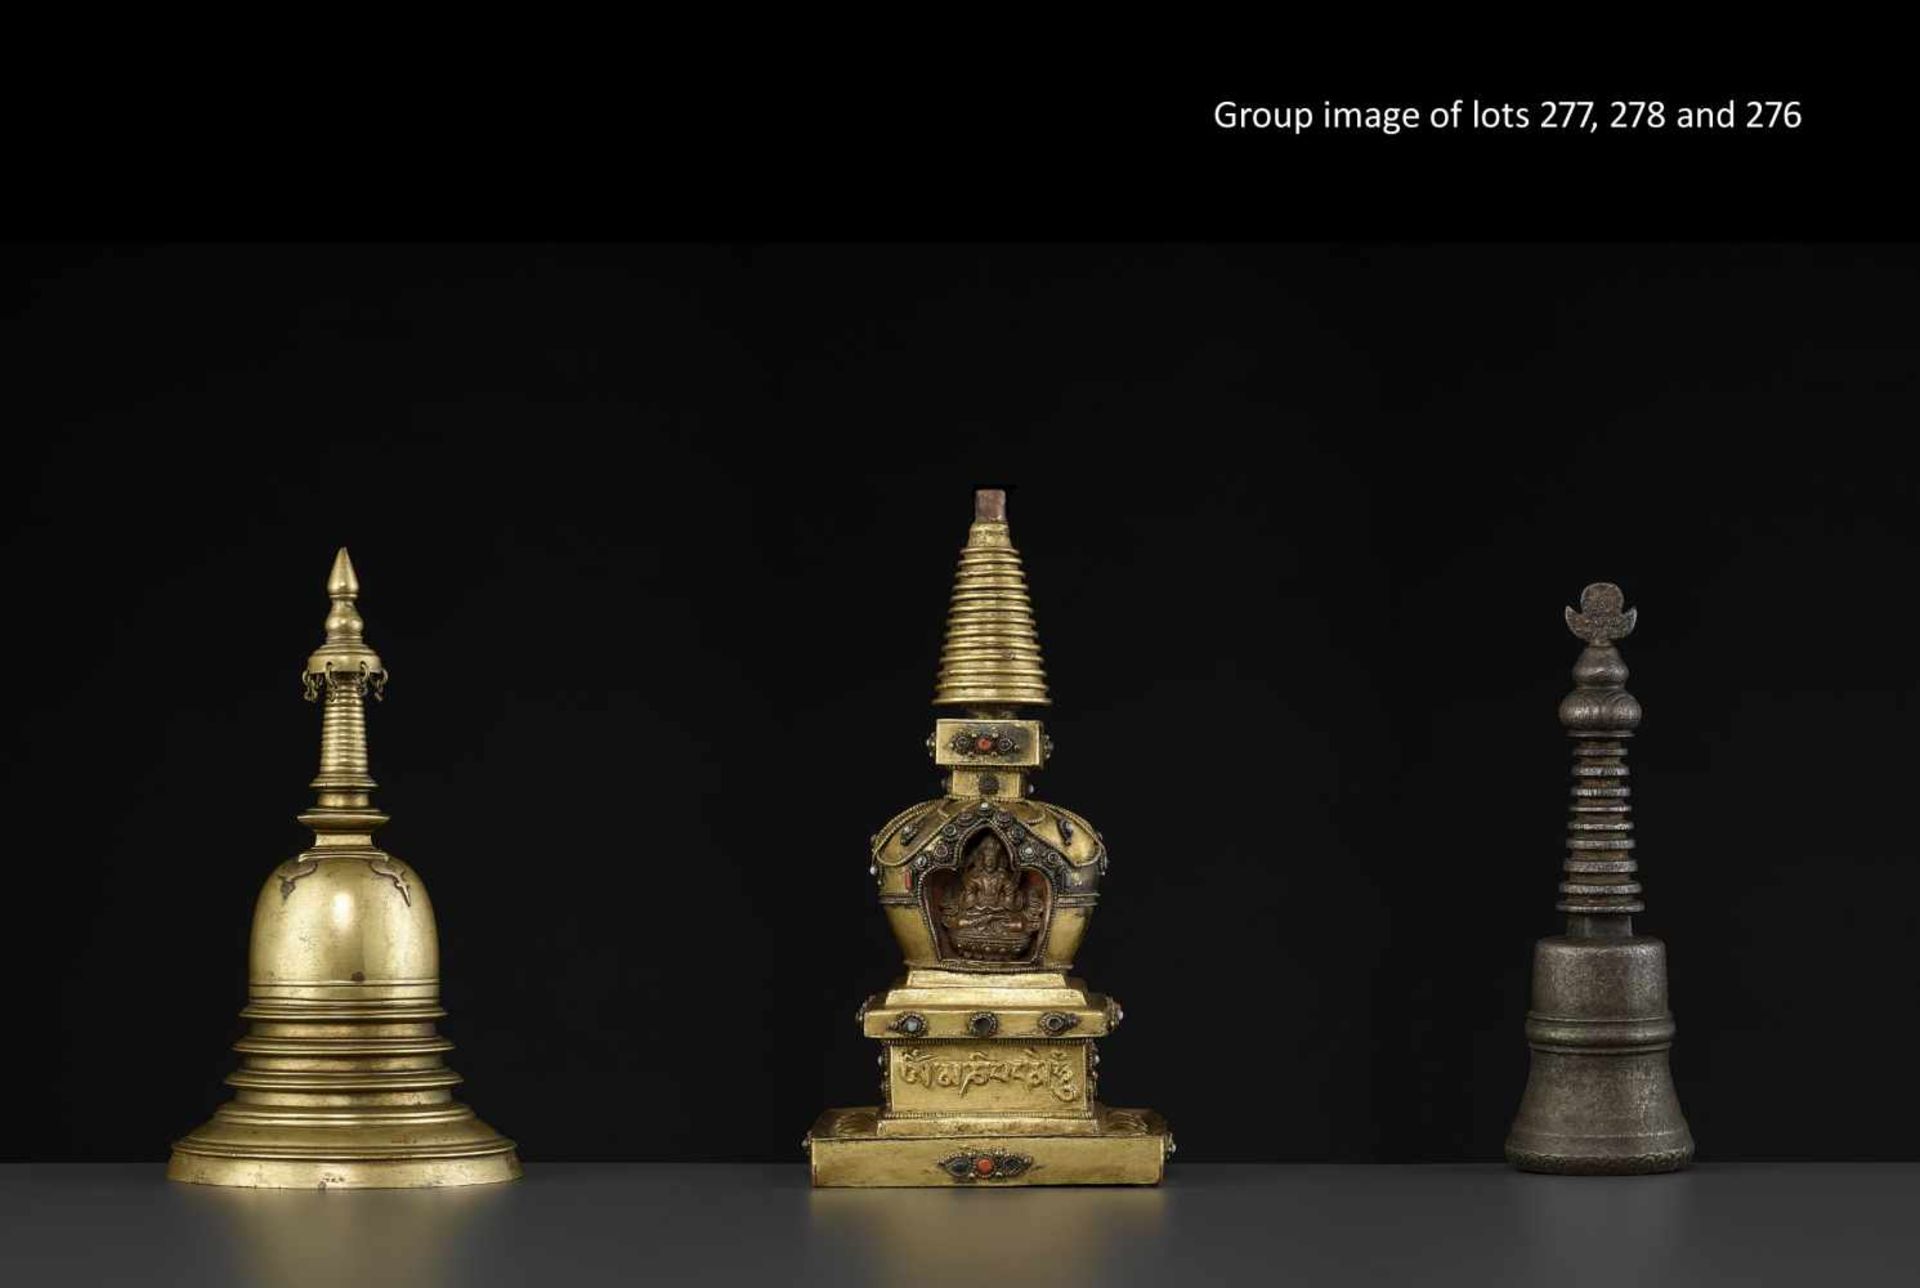 AN IRON STUPA 11TH CENTURYTibet or India. Massively cast-iron reliquary stupa with a distinctive - Image 9 of 9